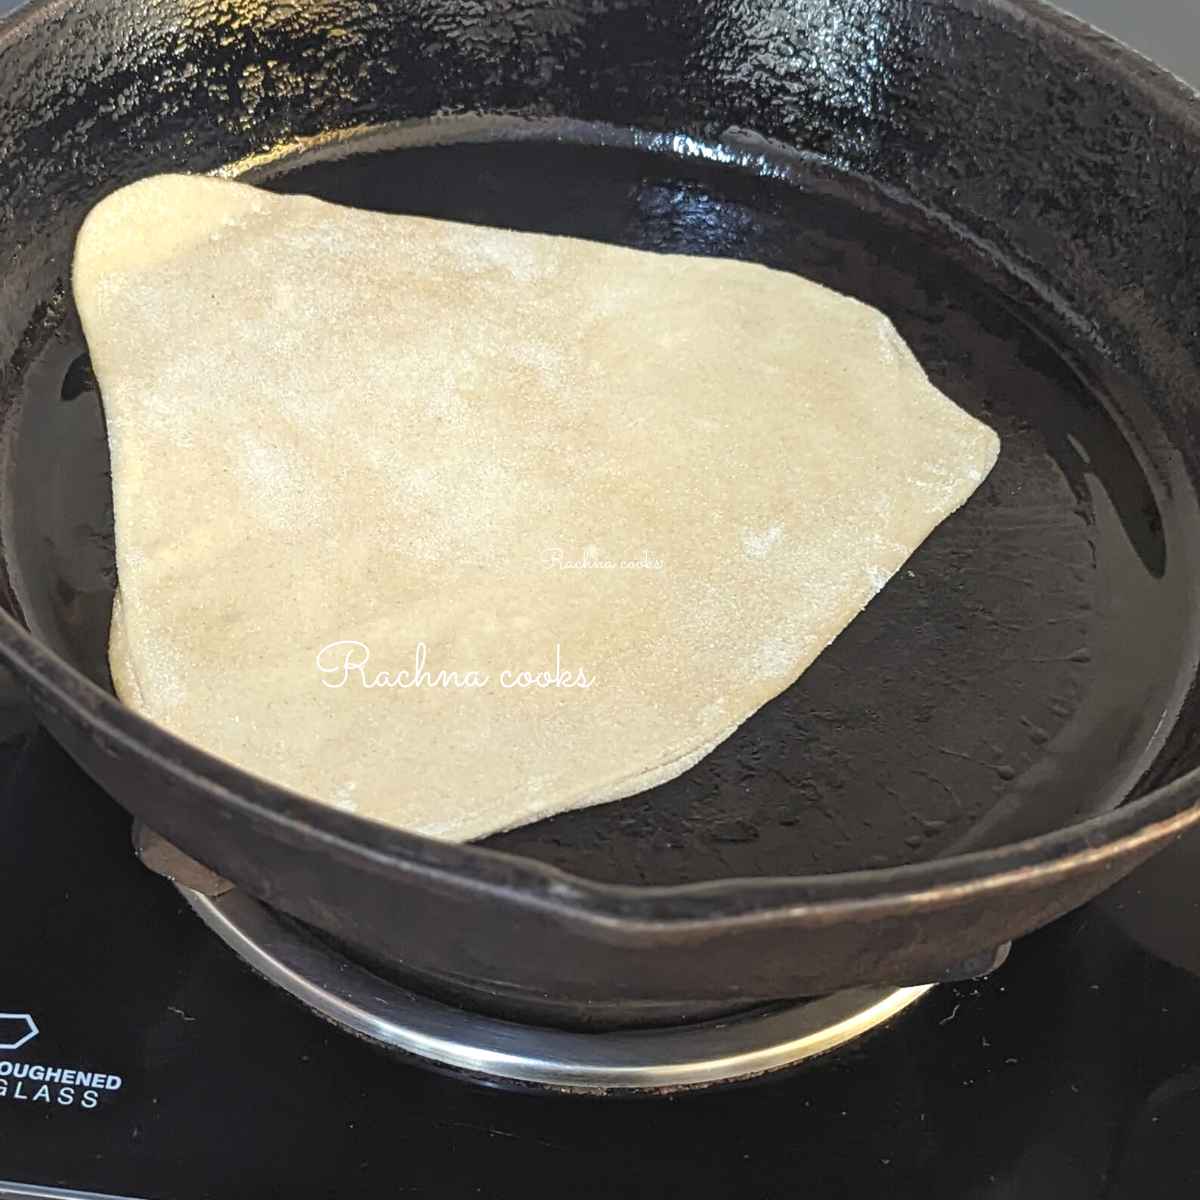 Triangular paratha in a skillet ready for frying.